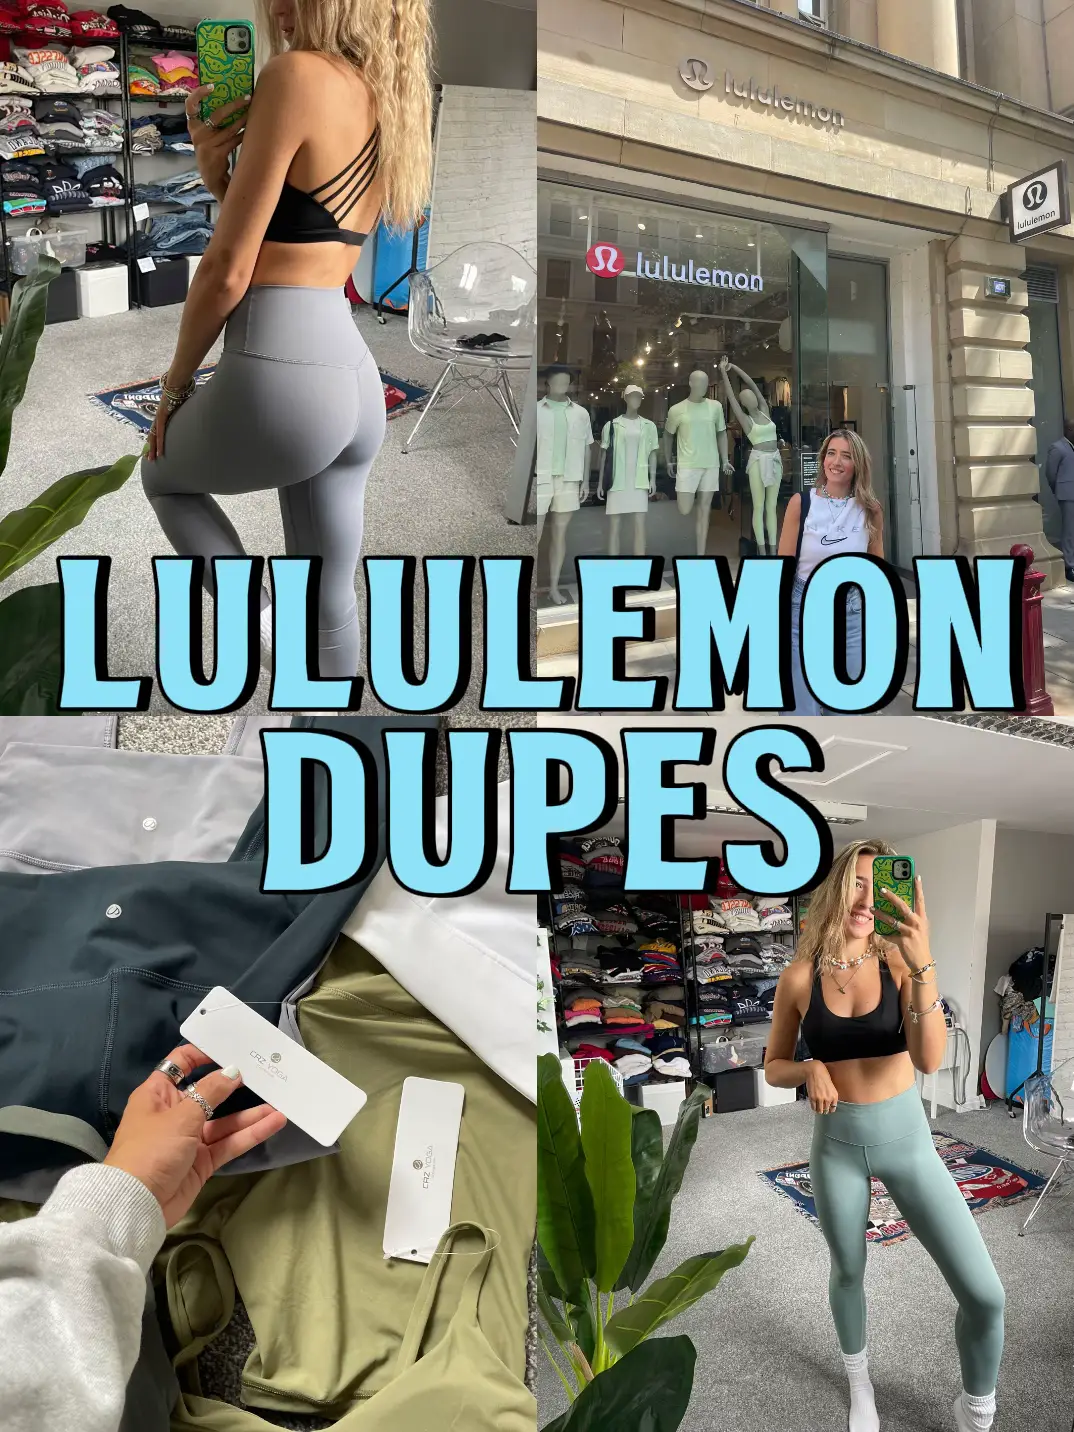 8 Lululemon Dupes That Can Save You Some Serious Cash This Winter